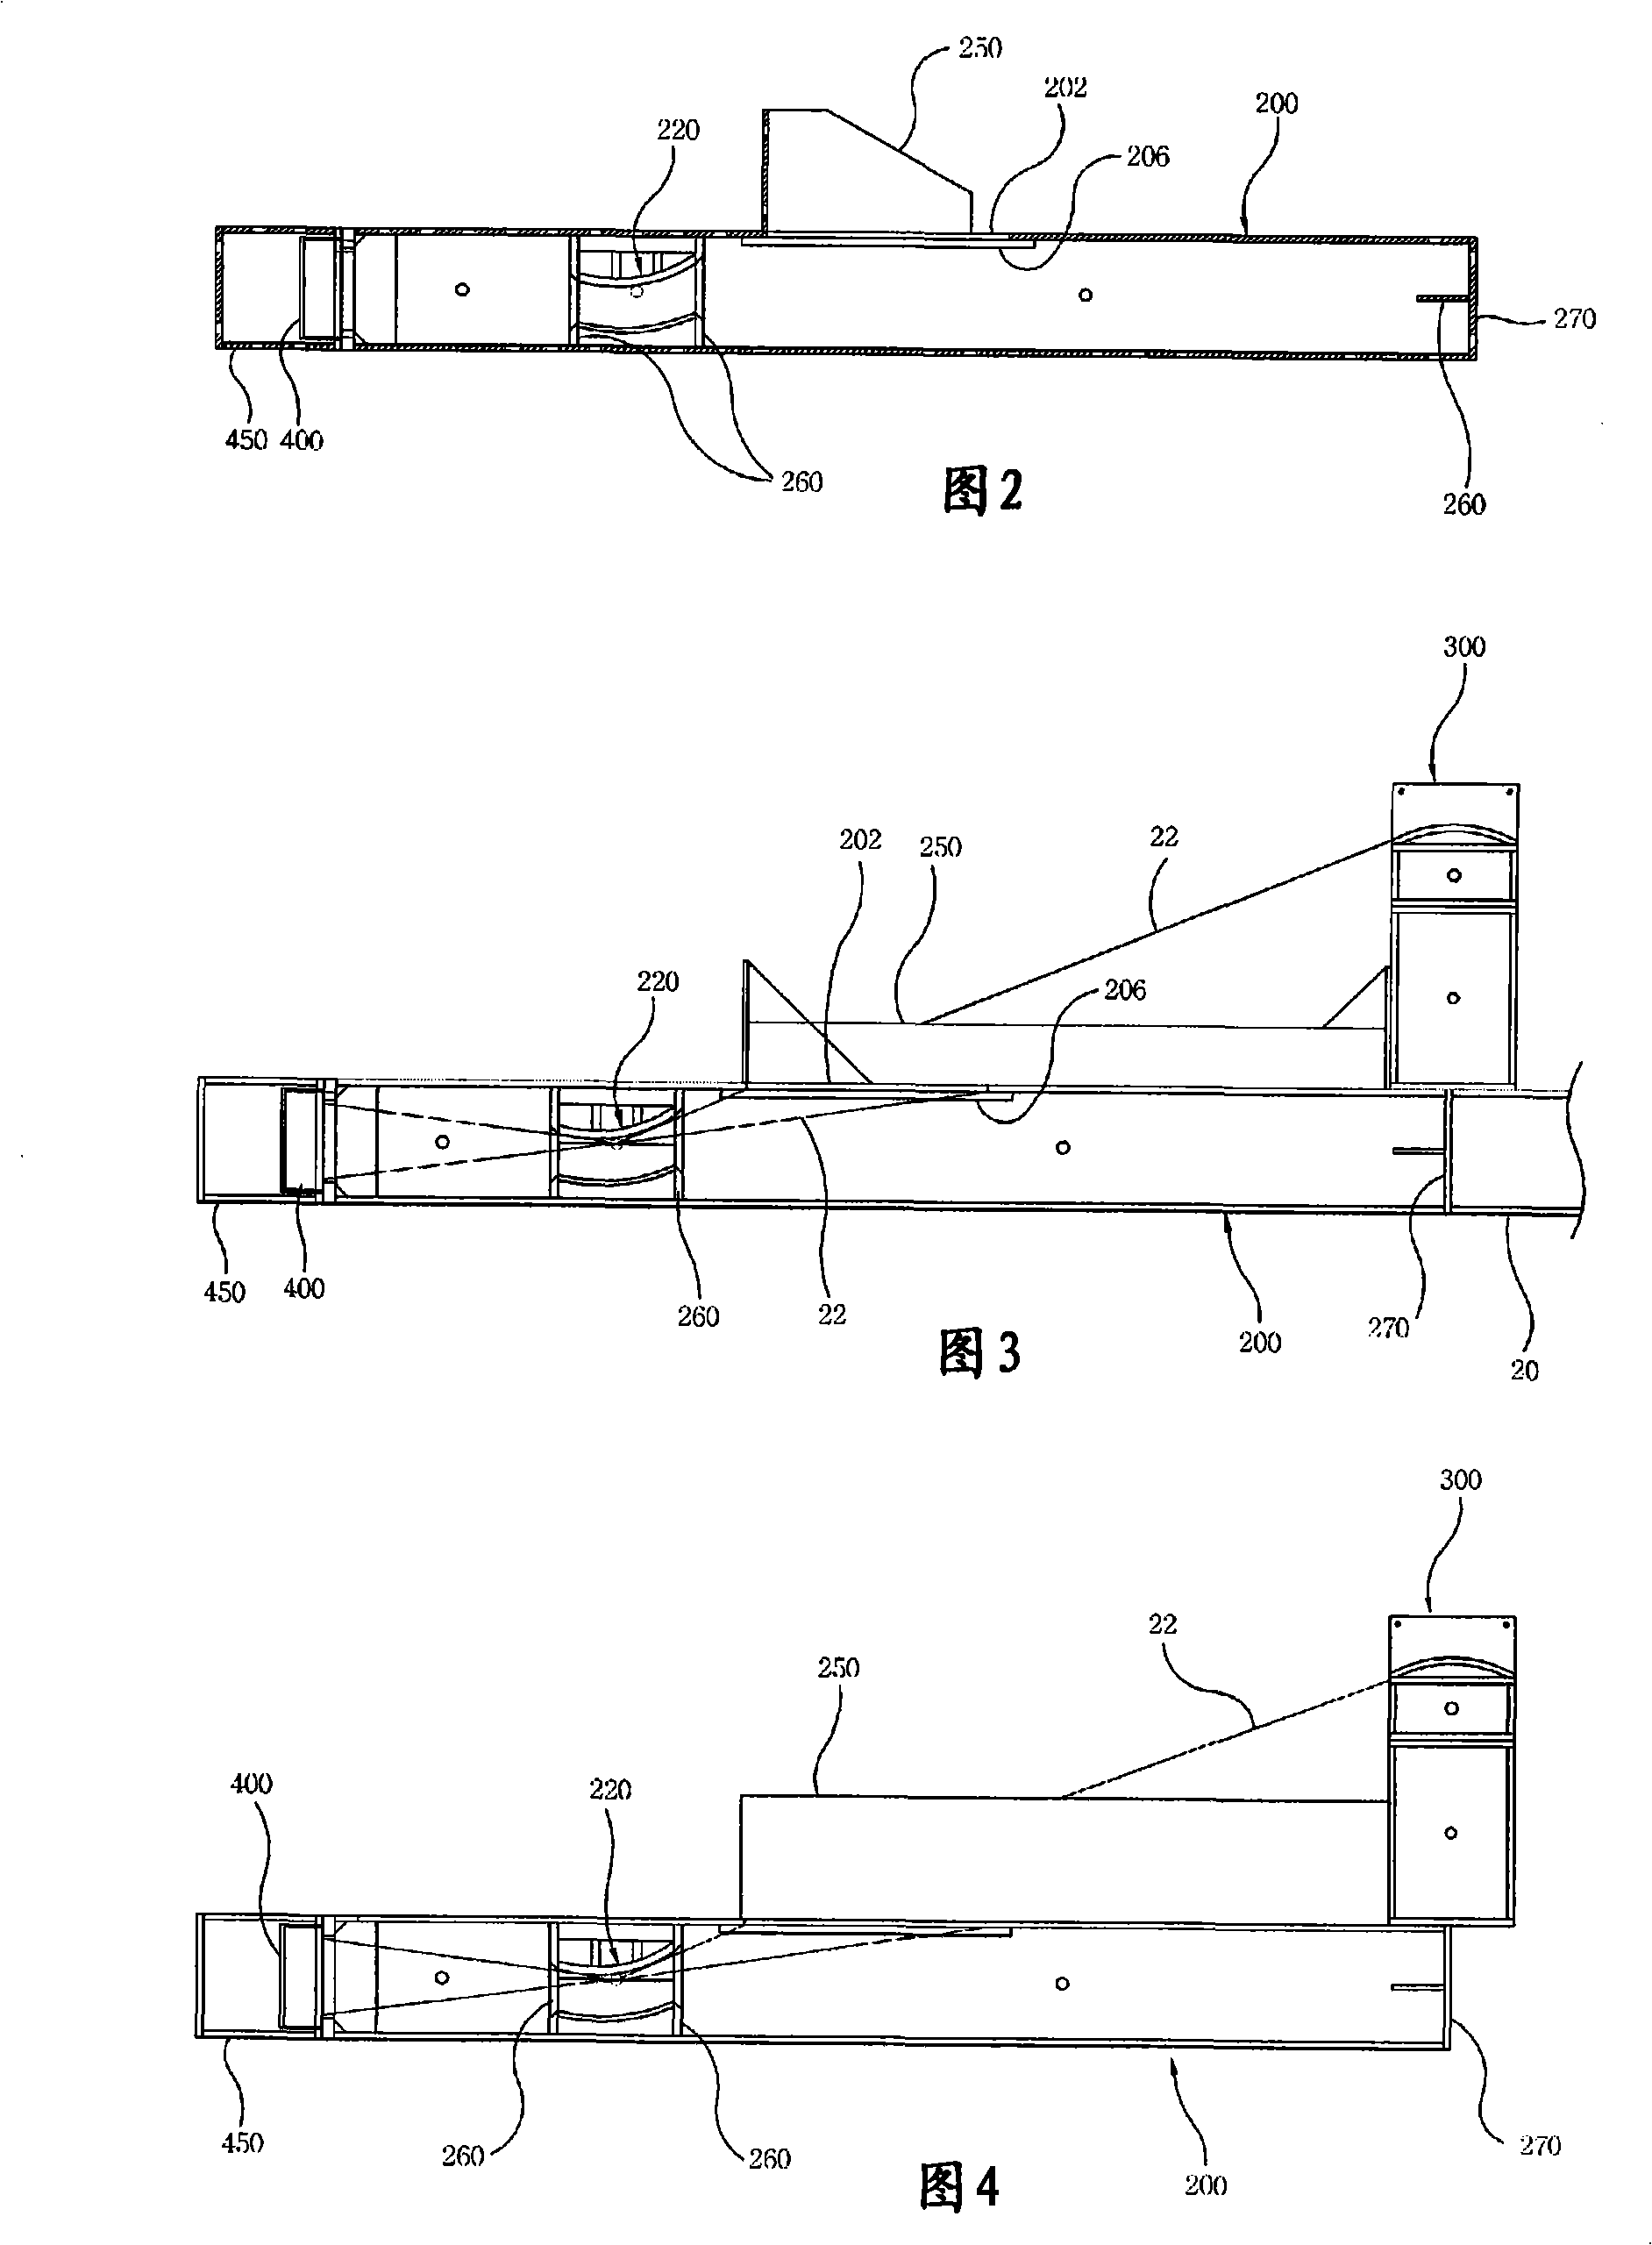 Apparatus for fixing a wale